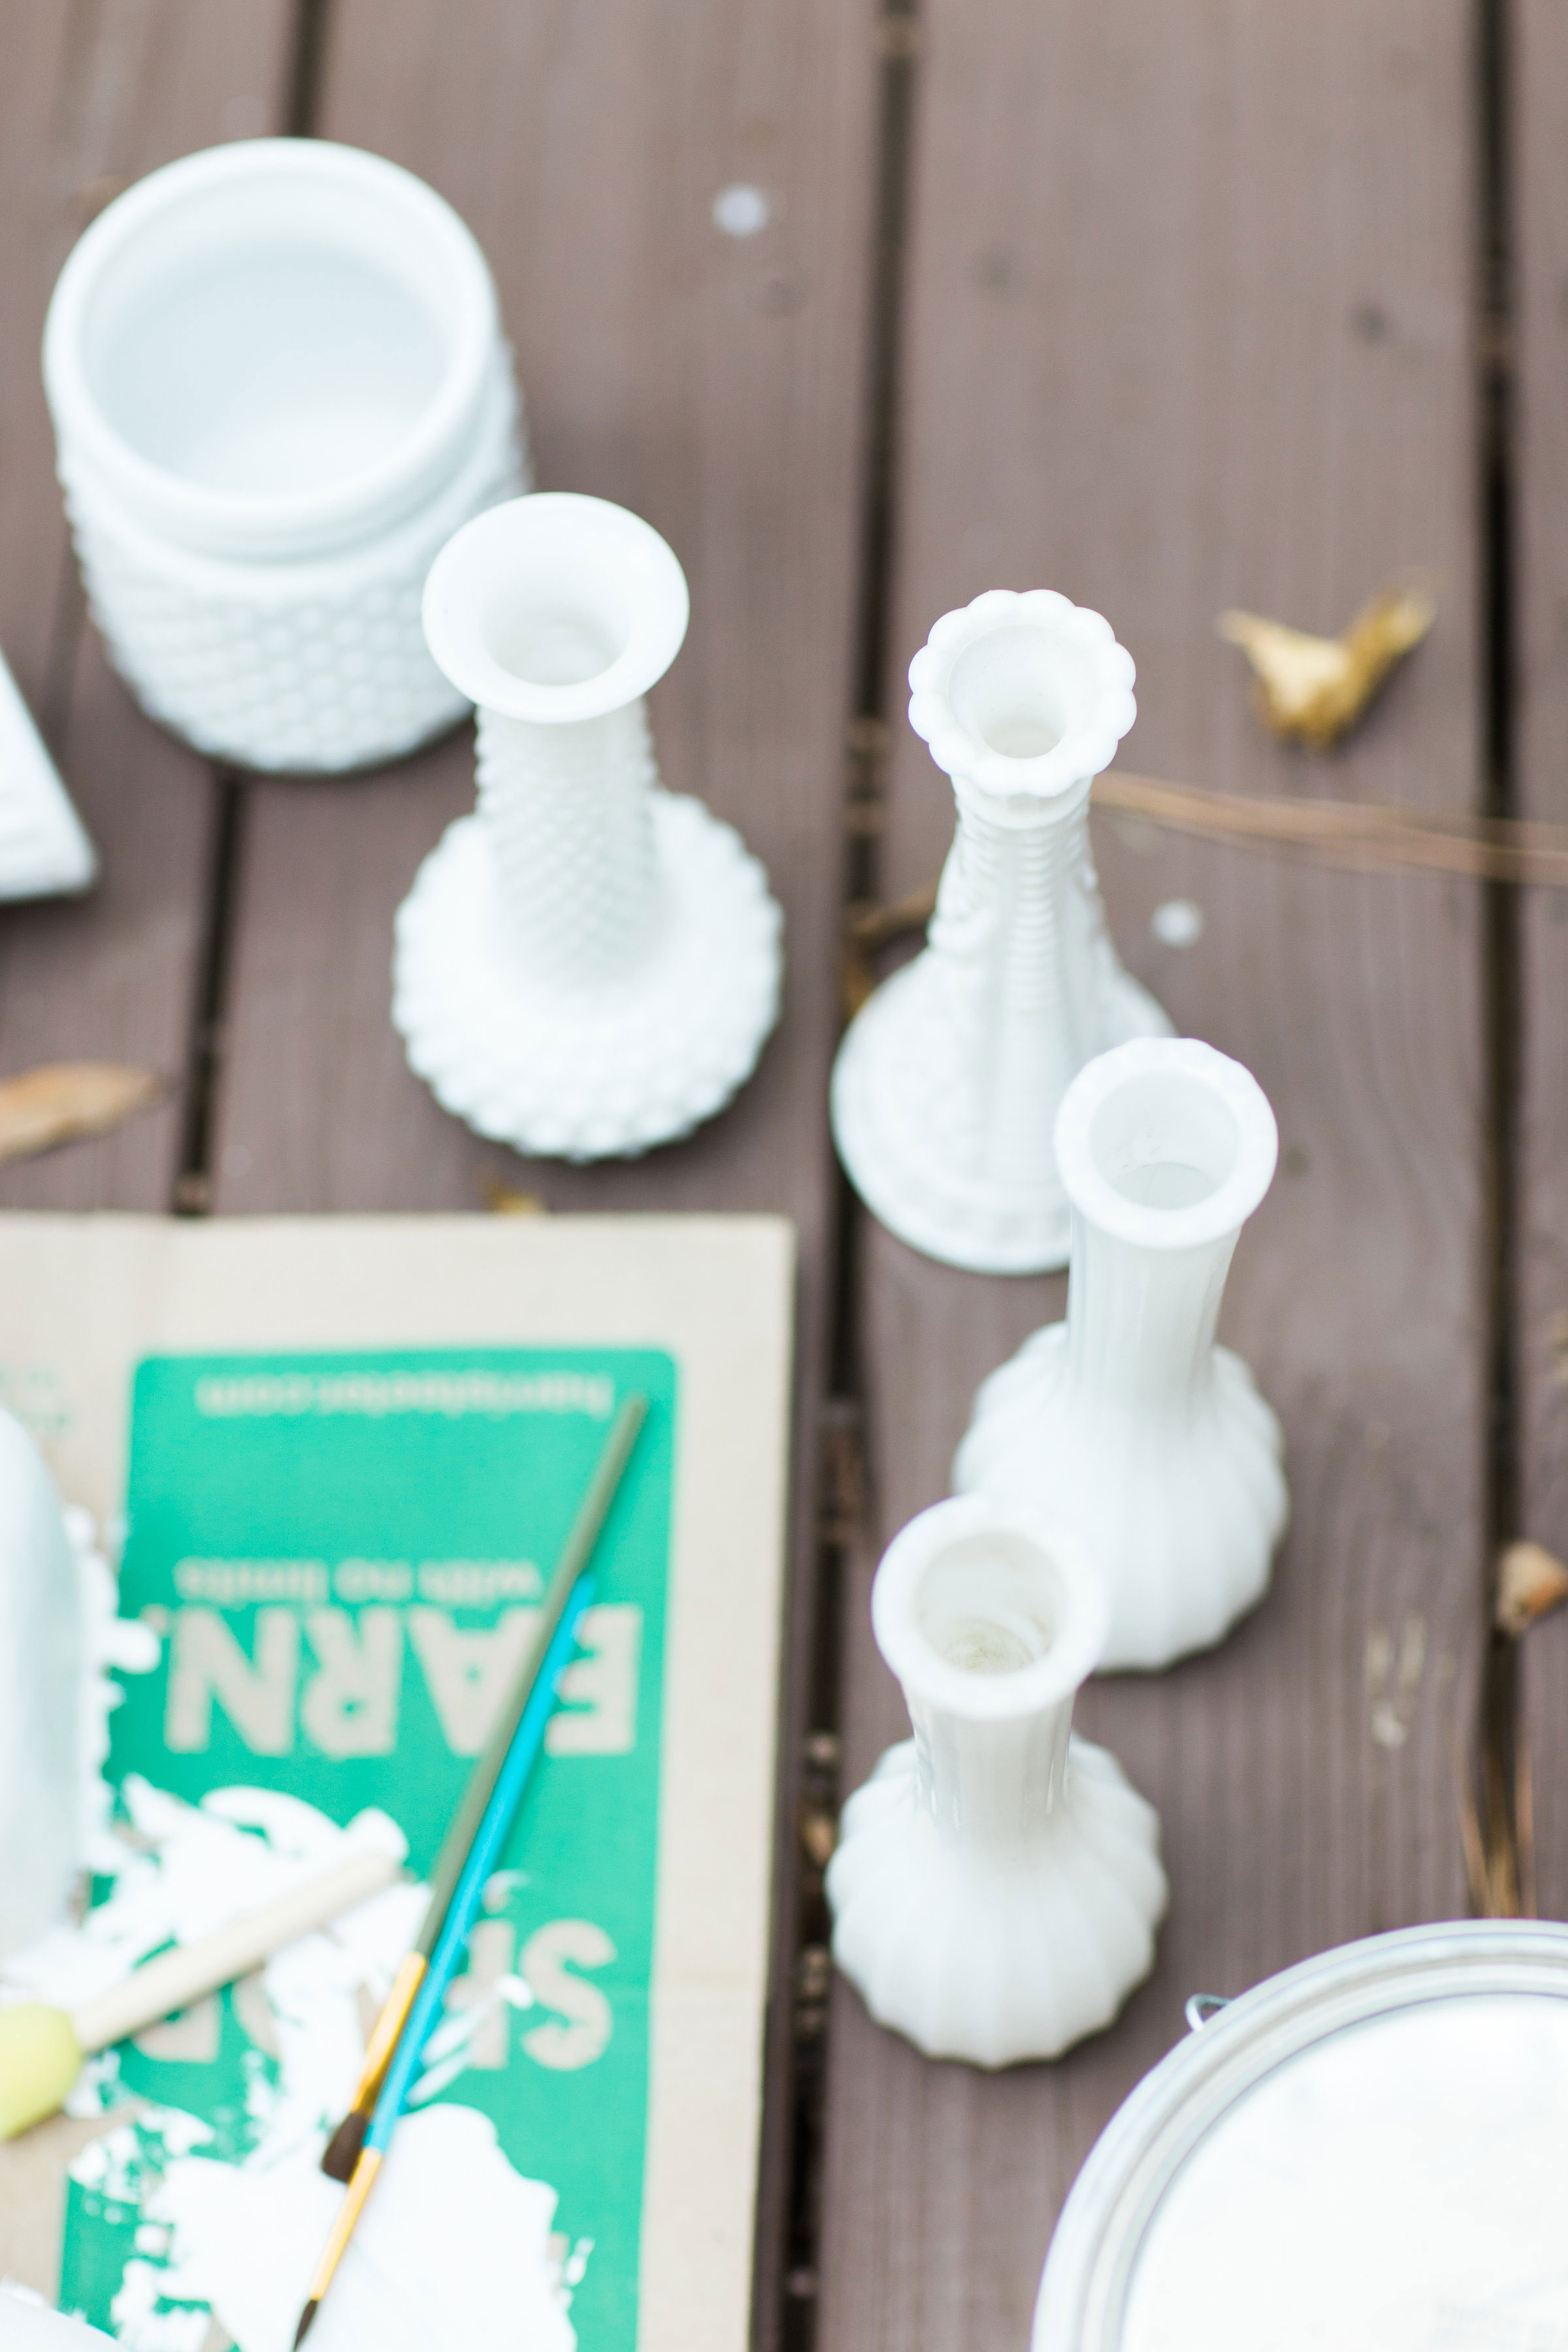 How to Make DIY Milk Glass. Click through for the easy step-by-step guide to making your own inexpensive version.